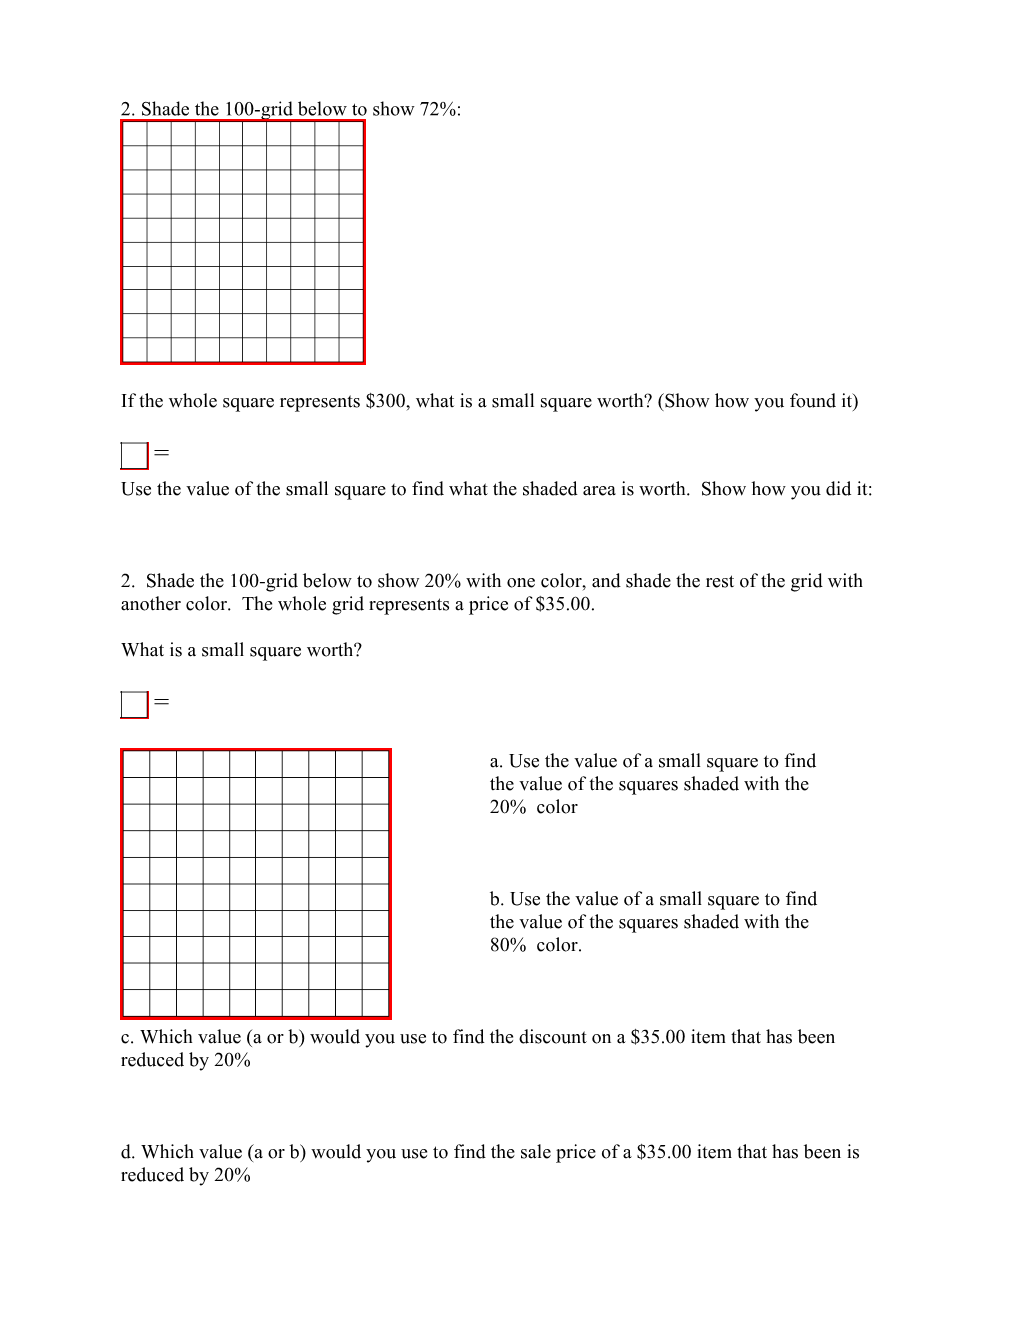 E. Give 2 More Examples of Fractions That It Would Be Easy to Show on a 100-Grid